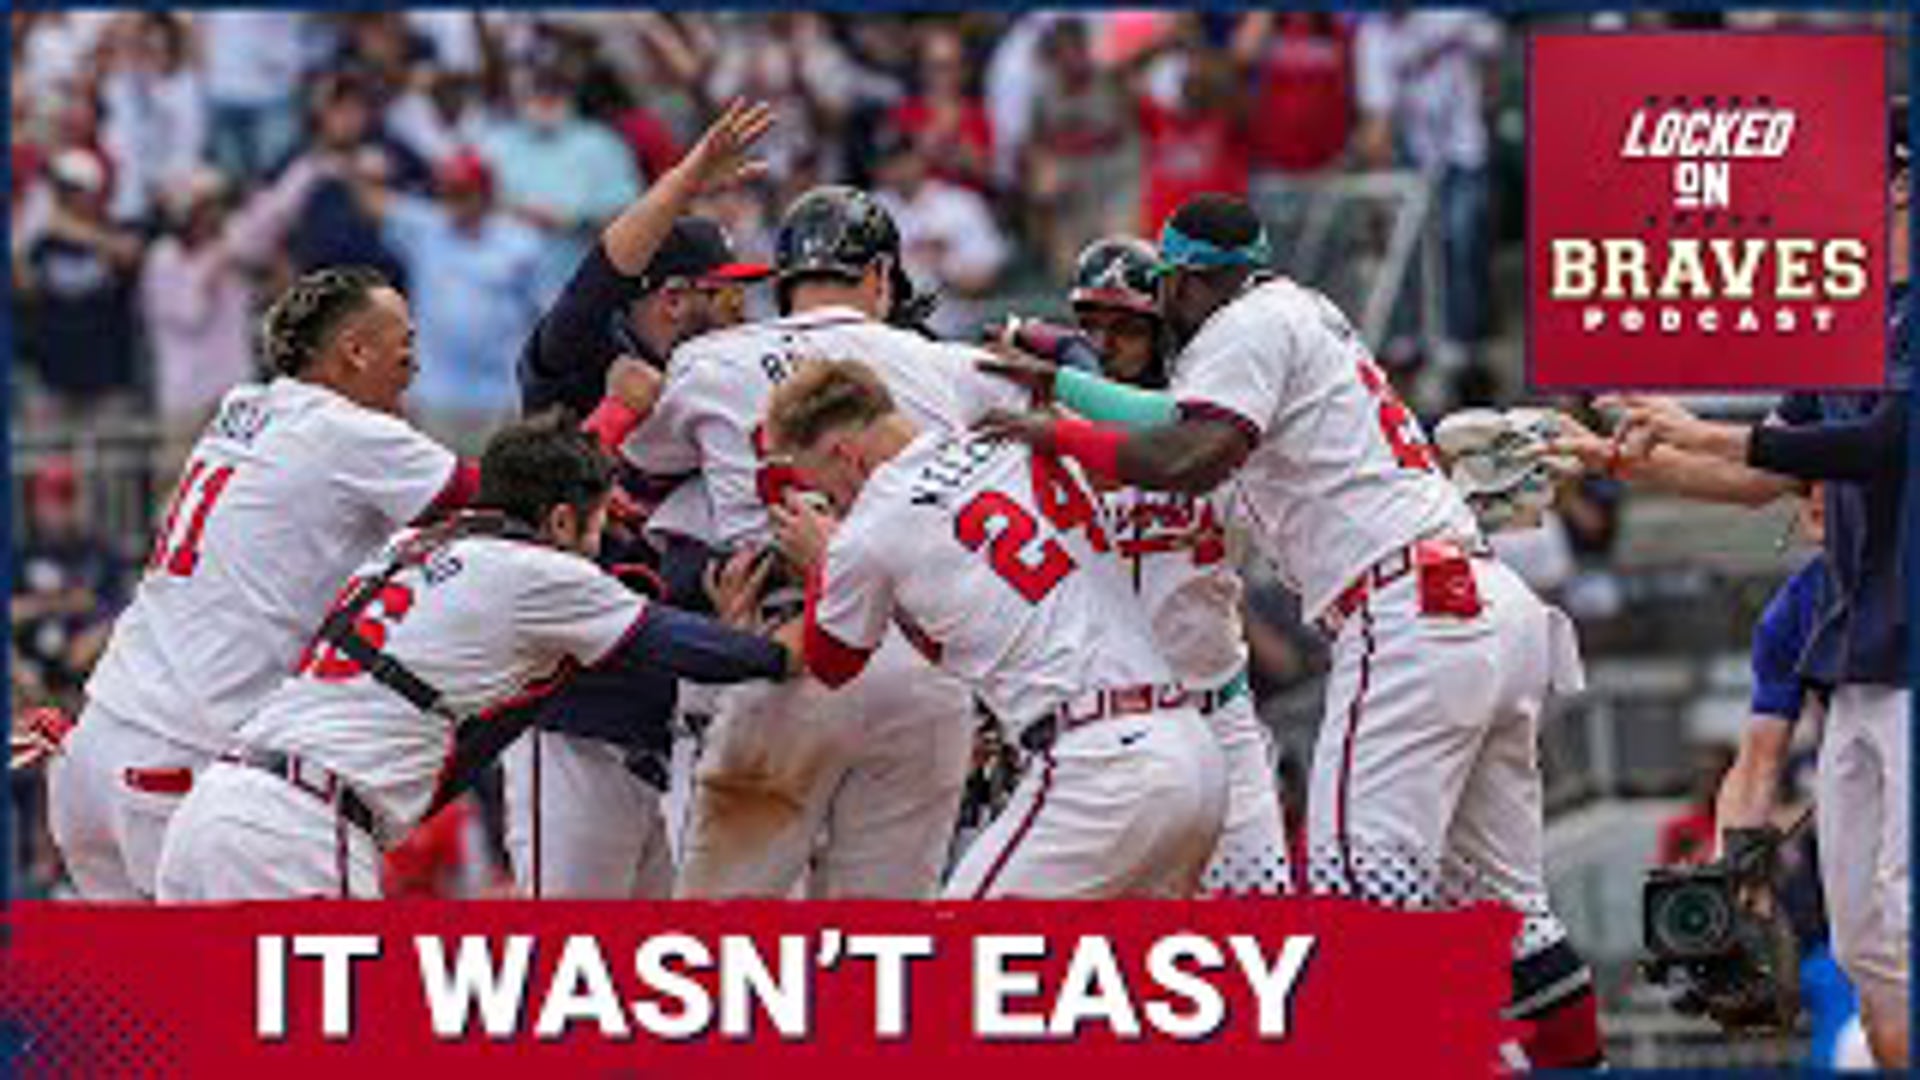 The teams with the two best records in baseball squared off in Atlanta this past weekend and the Braves came out on top with a walk-off win over the Guardians.